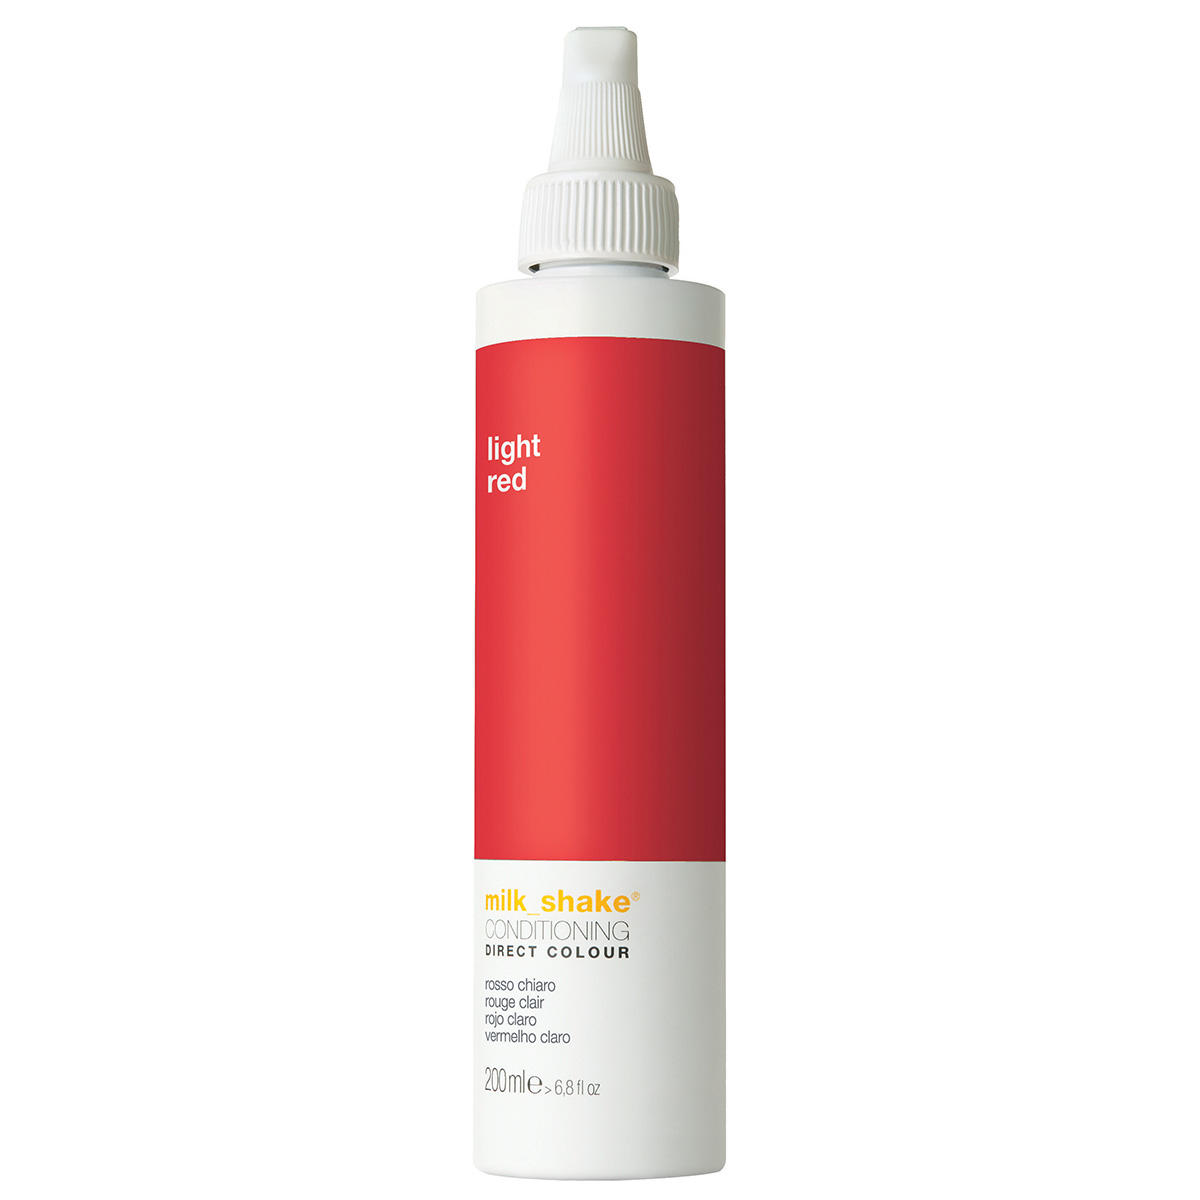 milk_shake Conditioning Direct Colour Light Red 200 ml - 1